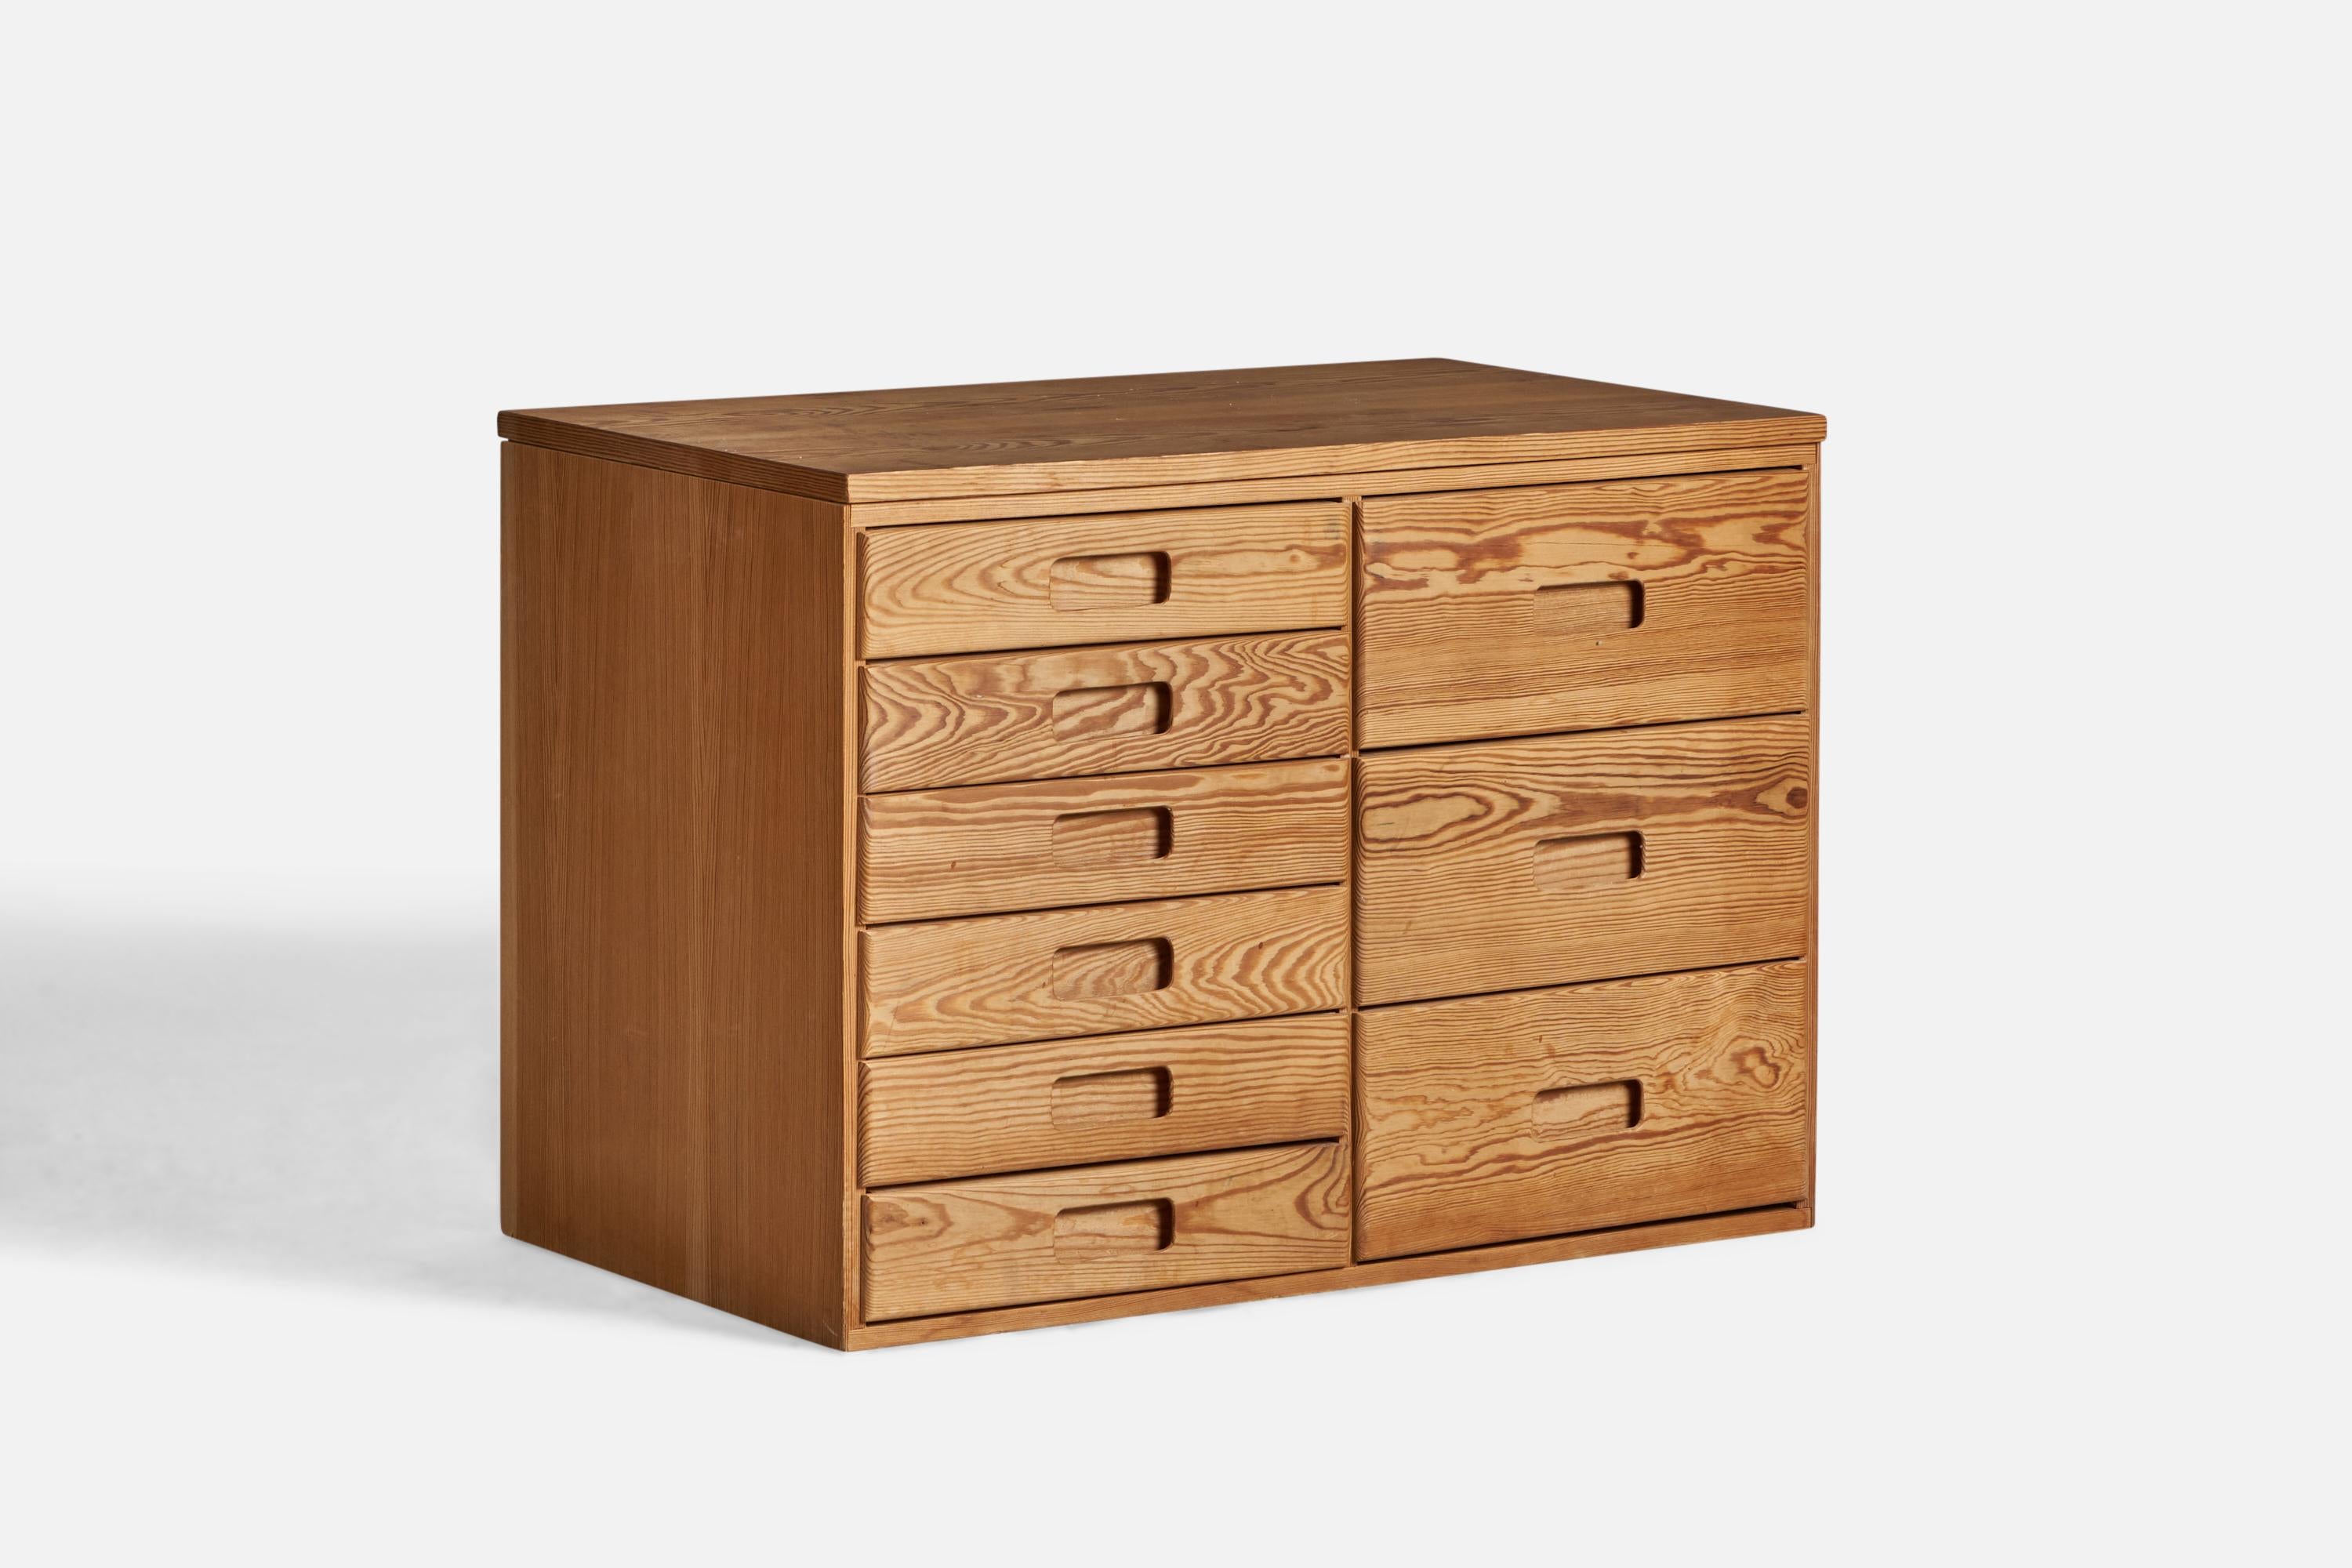 A small pine chest of drawers, designed and produced in Sweden, 1970s.